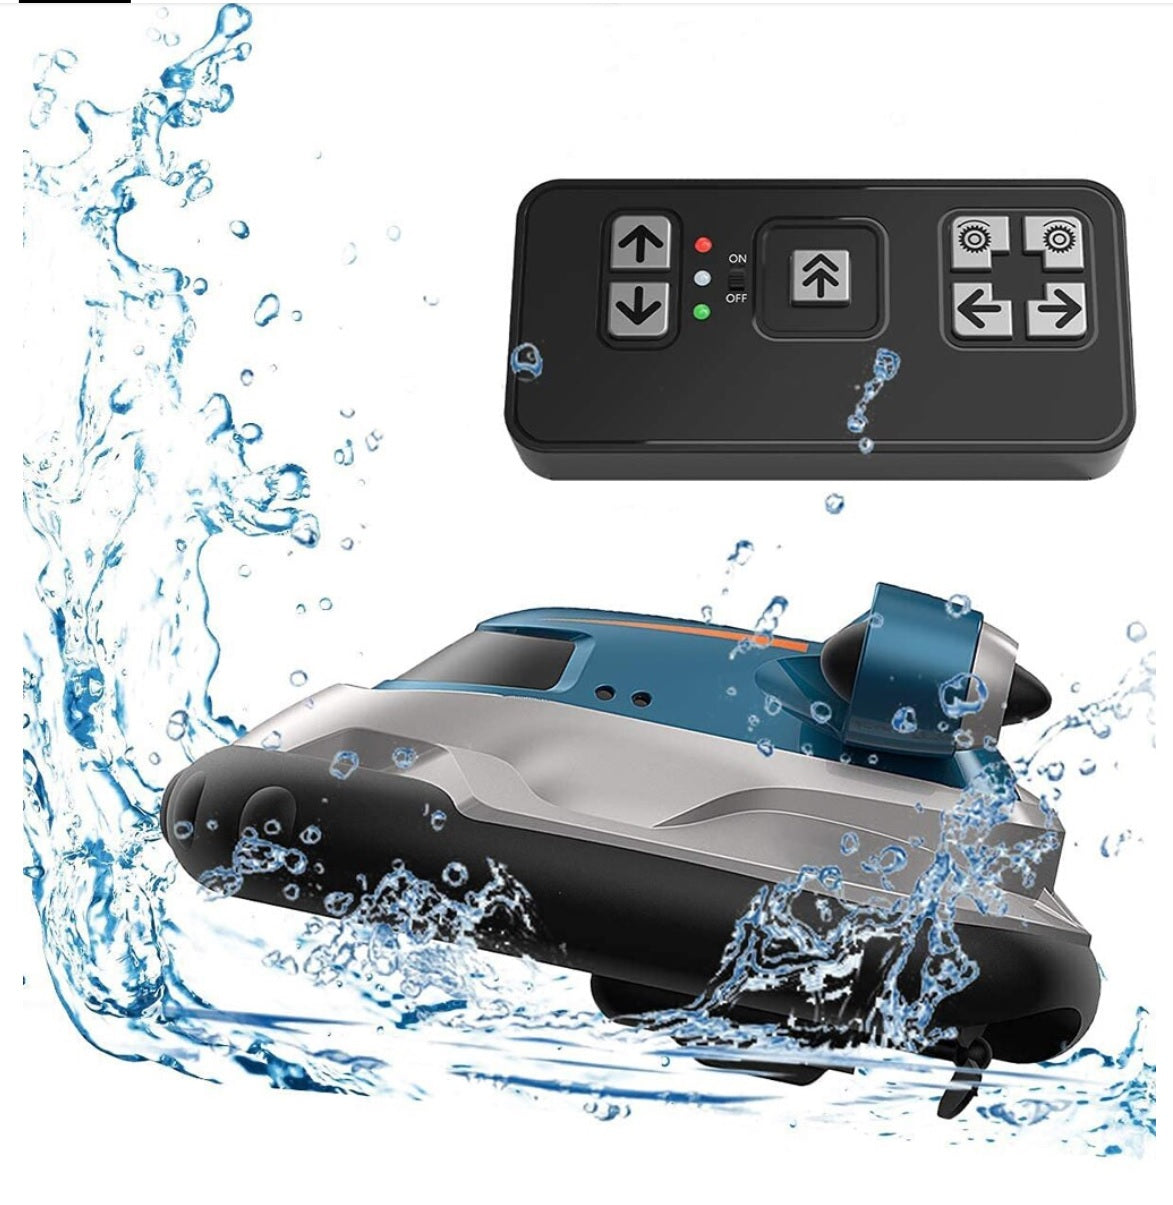 gps rc boat, gps rc boat Suppliers and Manufacturers at